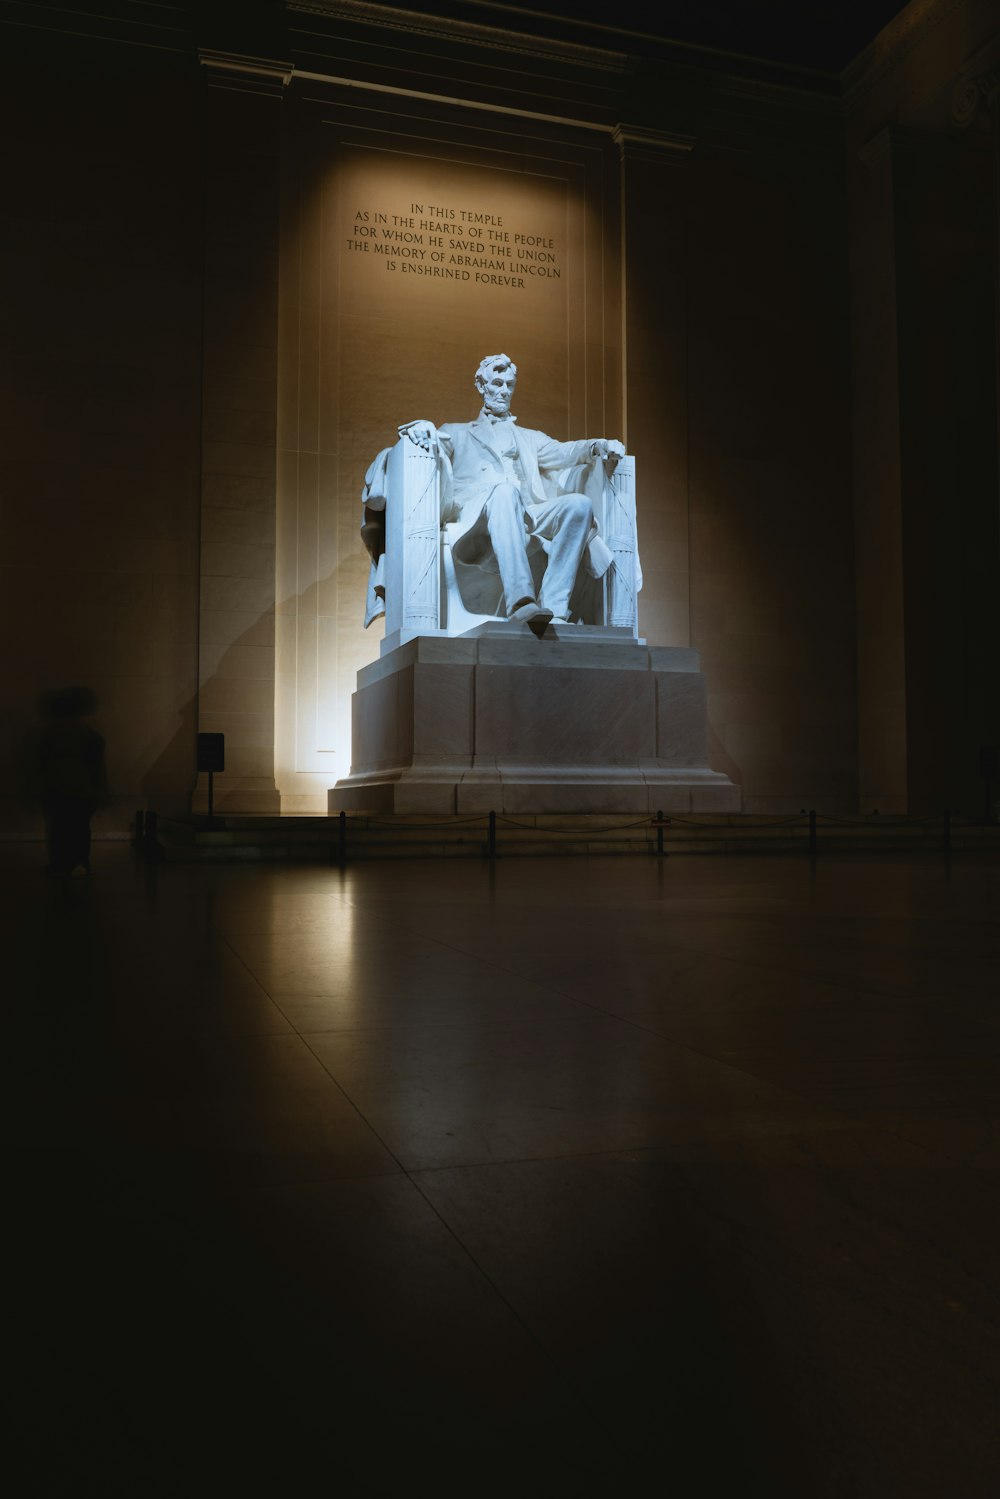 a statue of abraham lincoln in a dimly lit room